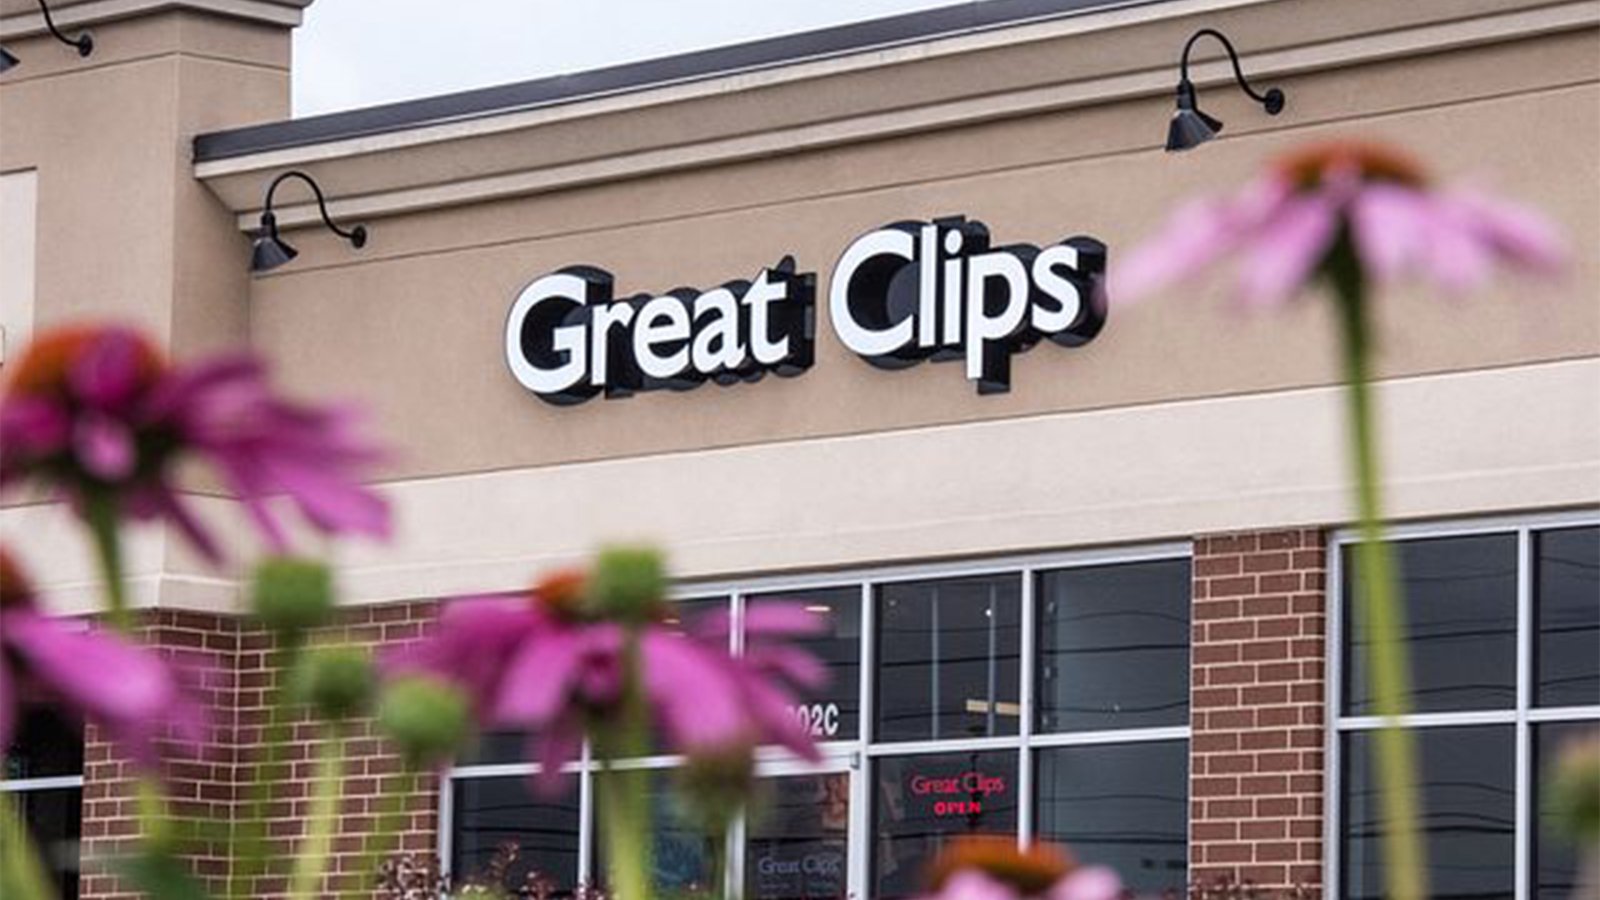 Great Clips Accepting Applications for Spring
Scholarship